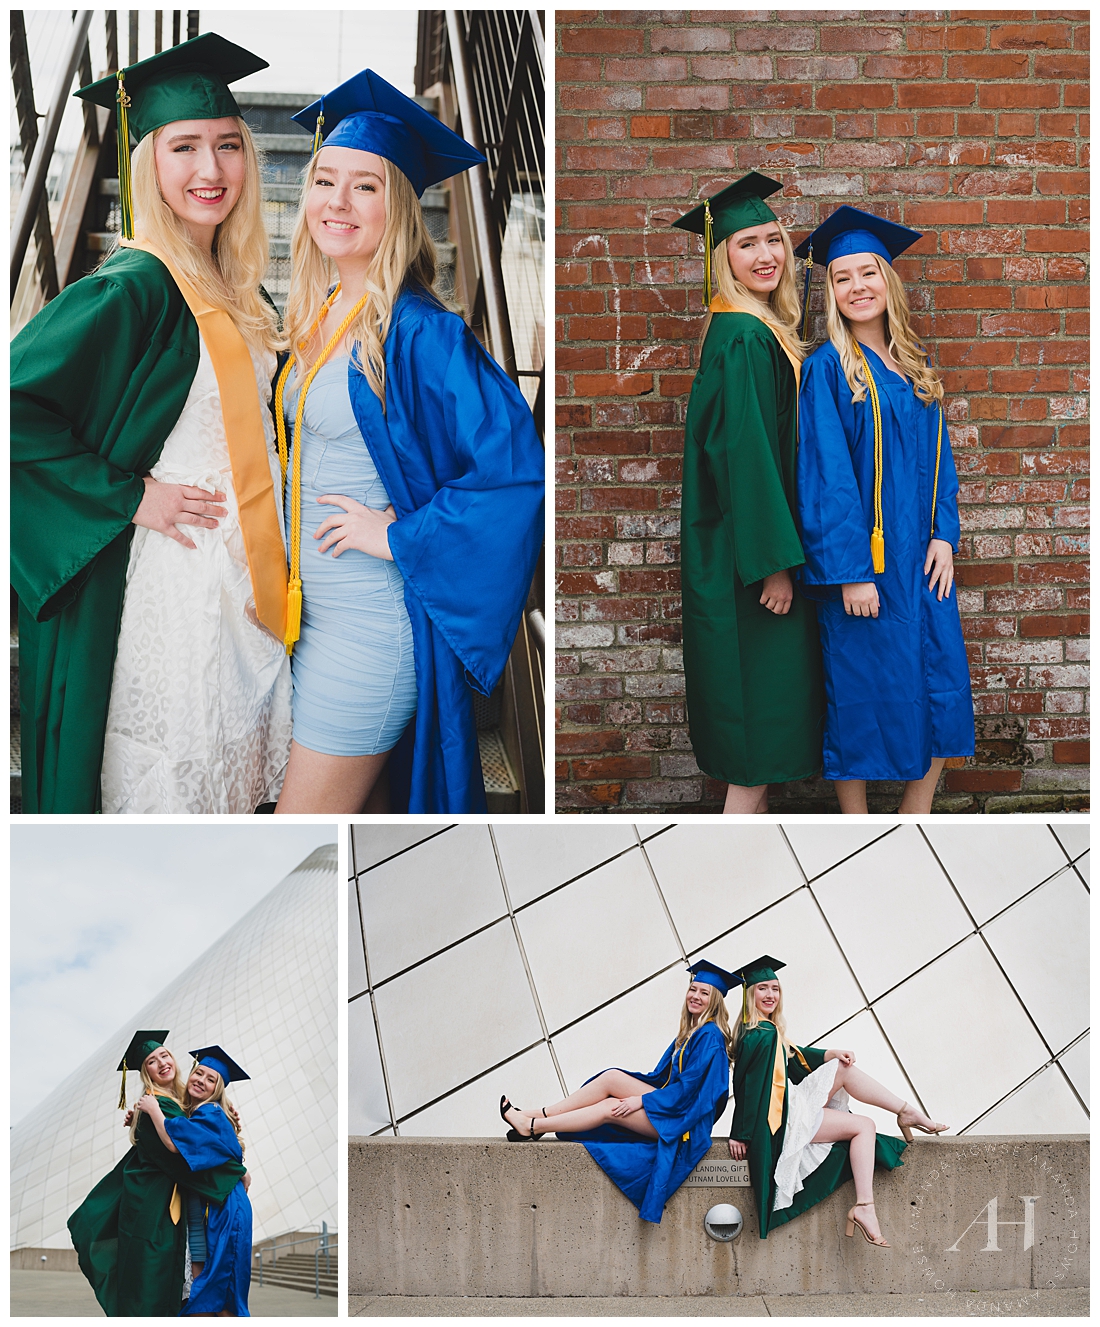 BFF Senior Cap and Gown Portrait Ideas in Tacoma | How To Get the Most Out of Your Graduation Gown | Photographed by the Best Tacoma Senior Portrait Photographer Amanda Howse